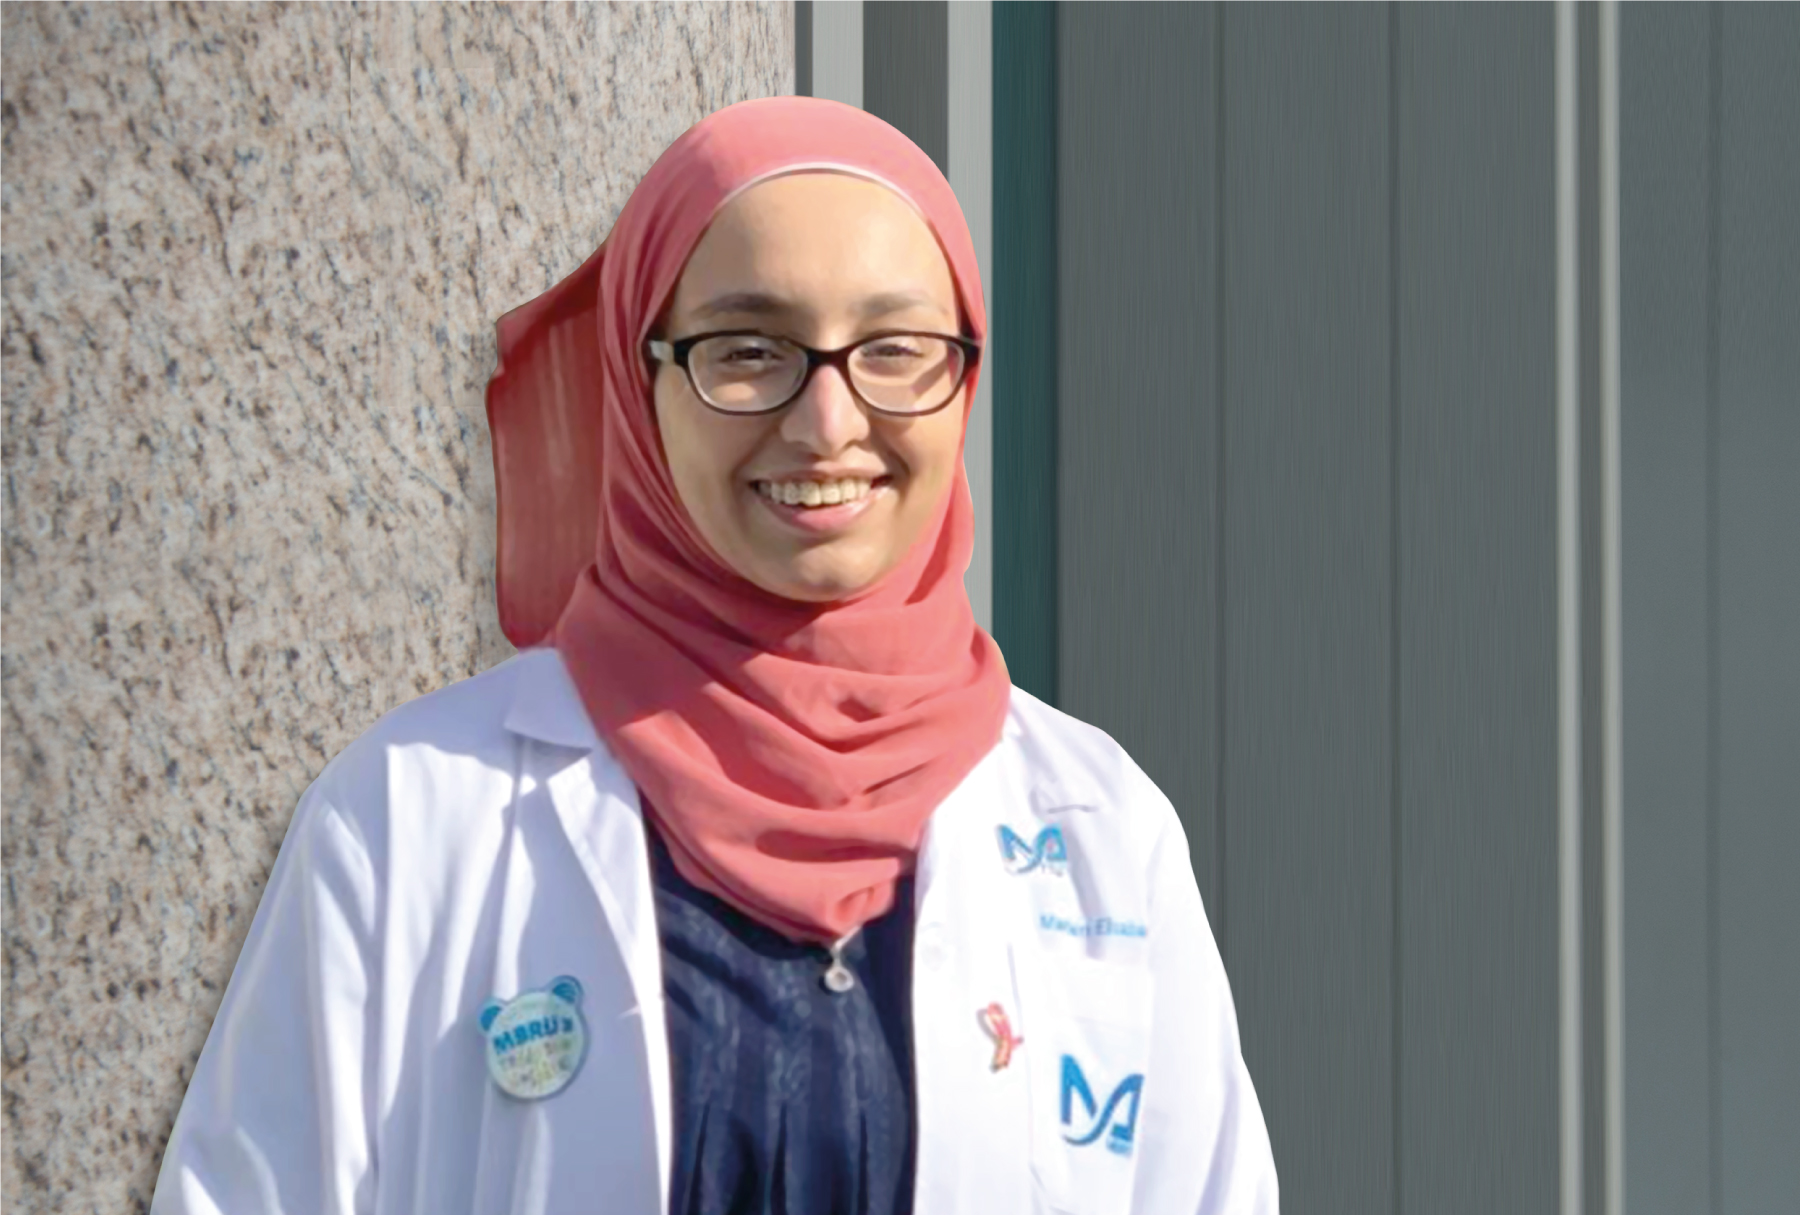 Mariam’s life-long dream is to help others heal